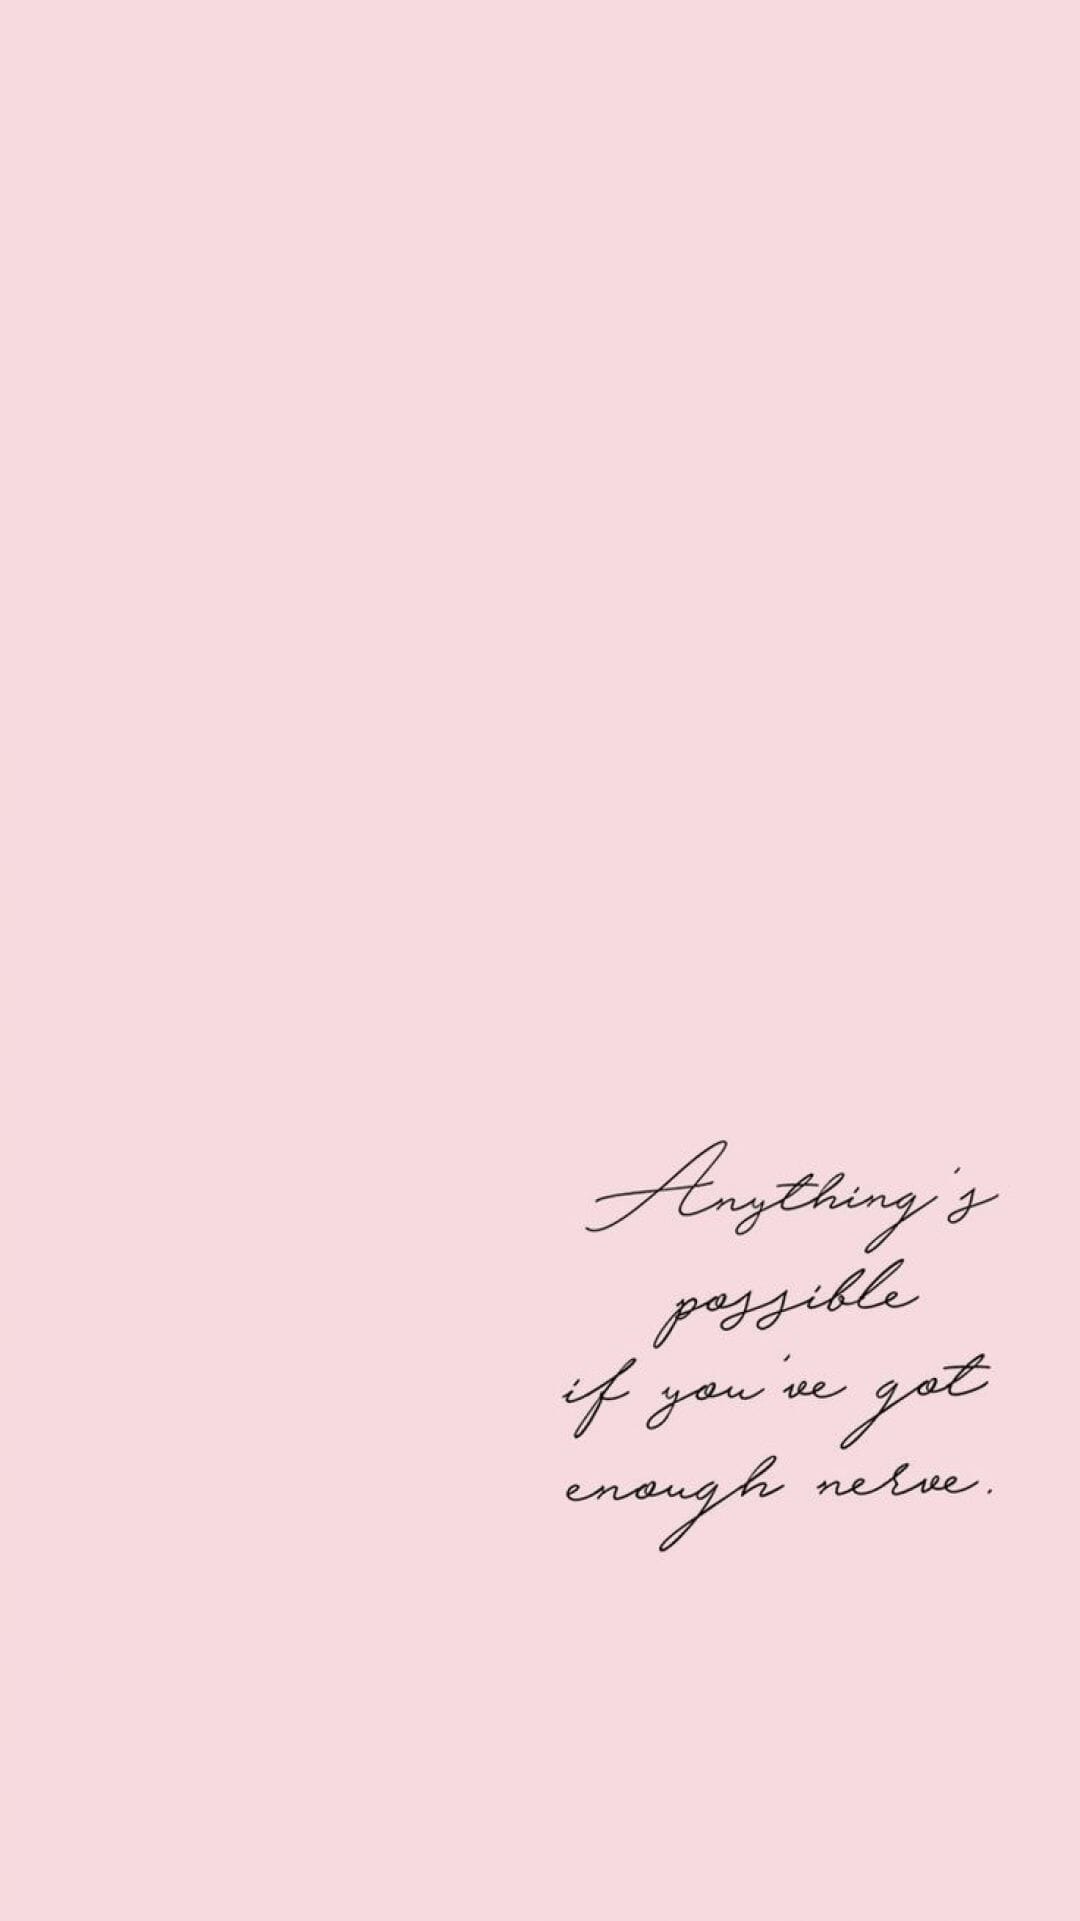 Motivation Aesthetic, iPhone, Desktop HD Background / Wallpaper (1080p, 4k) HD Wallpaper (Desktop Background / Android / iPhone) (1080p, 4k) (1080x1921)